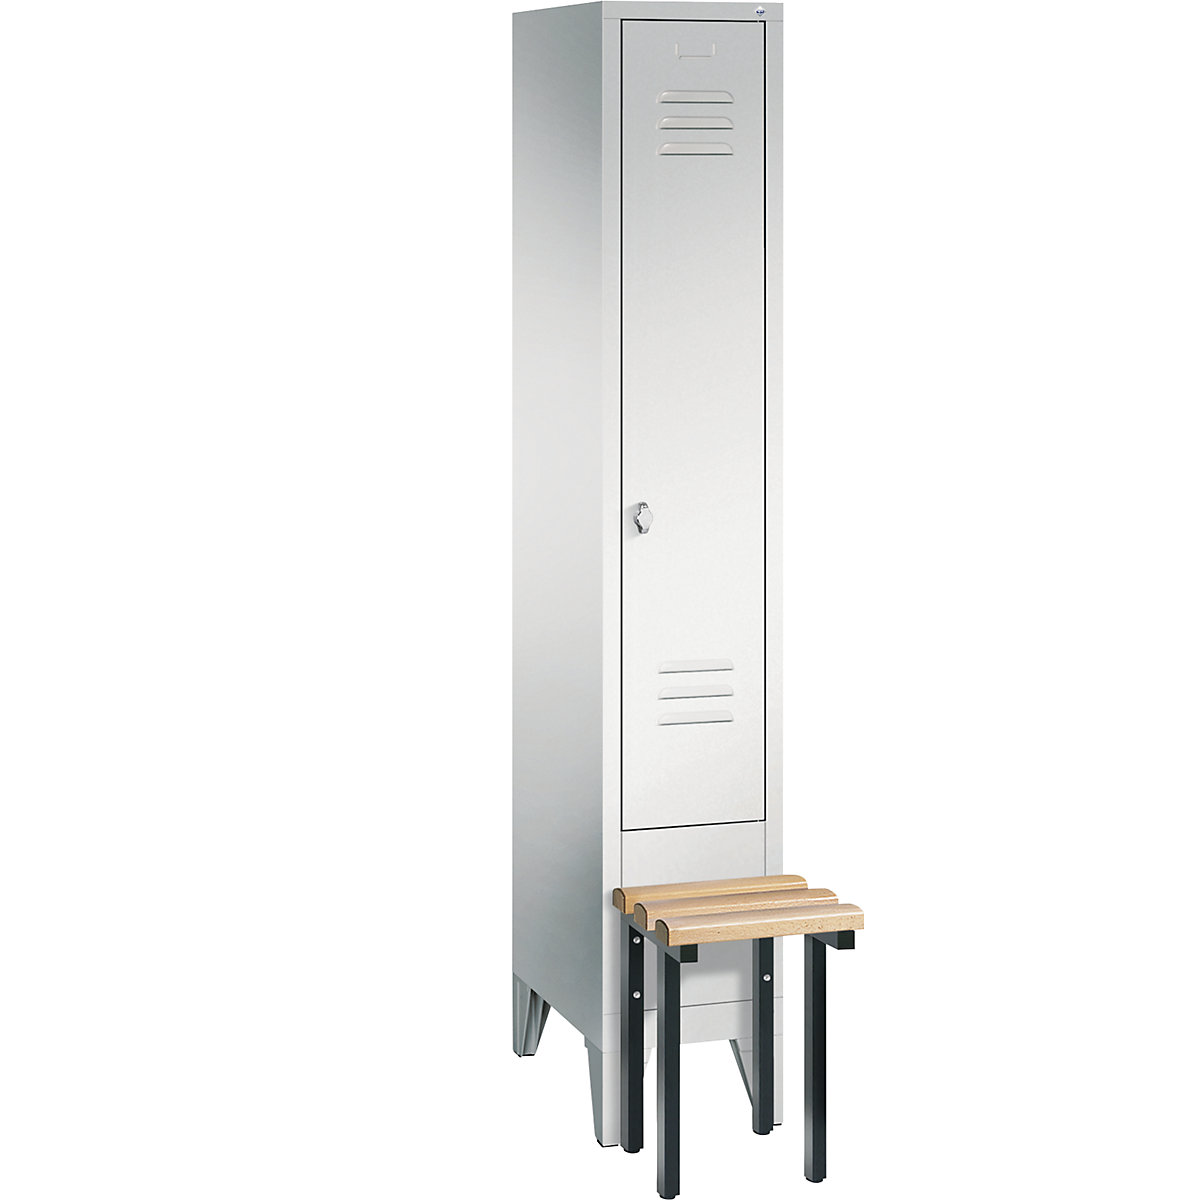 CLASSIC cloakroom locker with bench mounted in front – C+P, 1 compartment, compartment width 300 mm, light grey-6